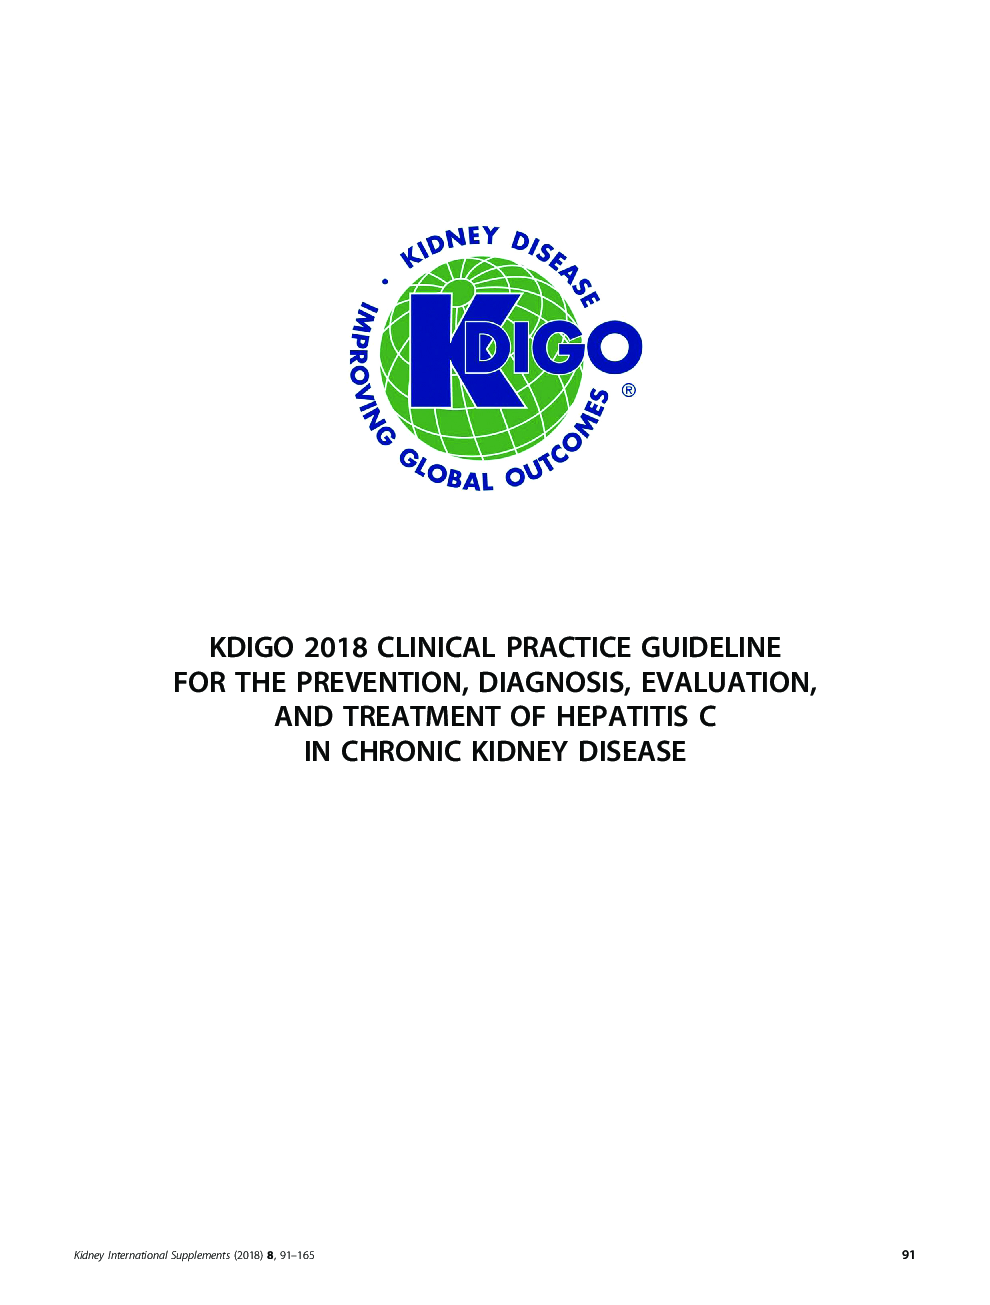 KDIGO 2018 Clinical Practice Guideline forÂ theÂ Prevention, Diagnosis, Evaluation, and Treatment of Hepatitis C in Chronic Kidney Disease